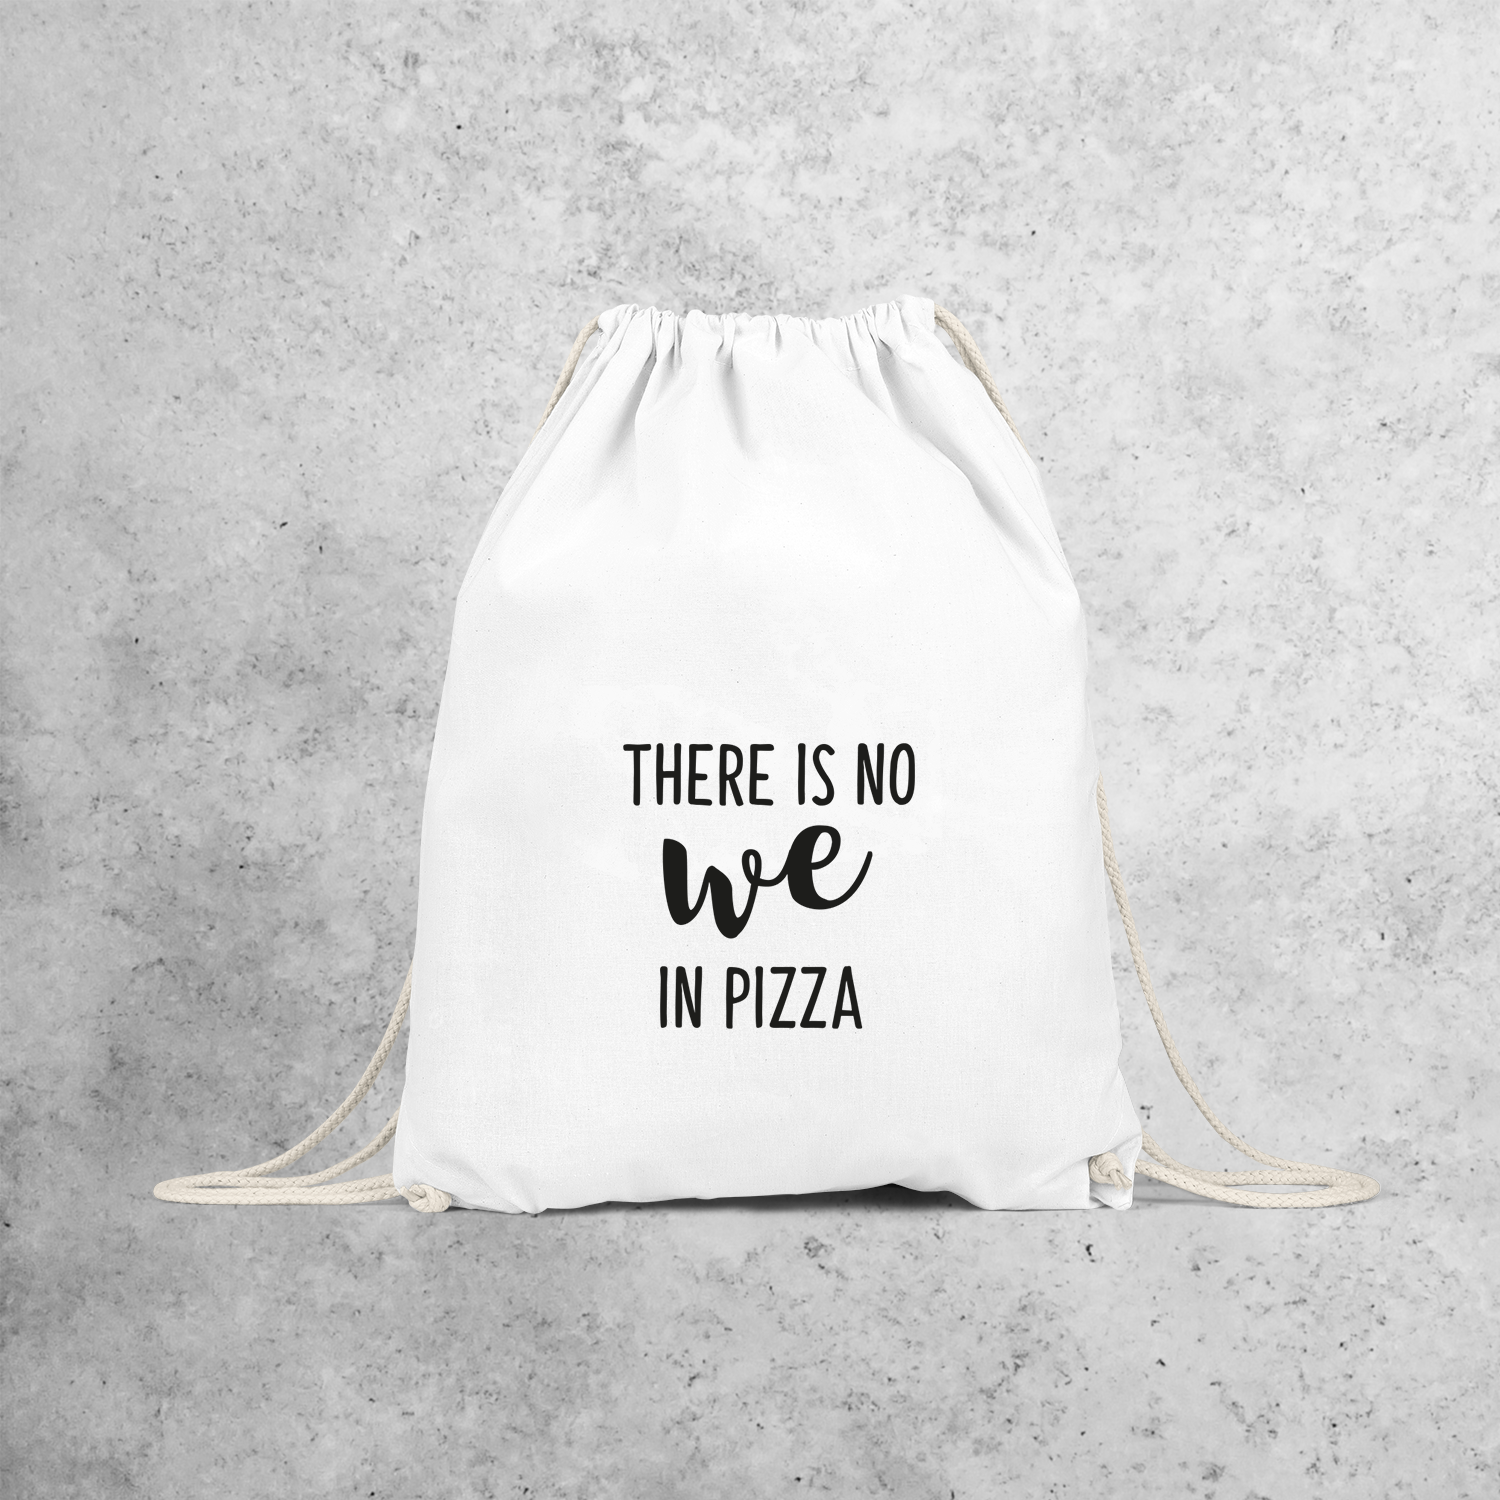 'There is no we in pizza' backpack